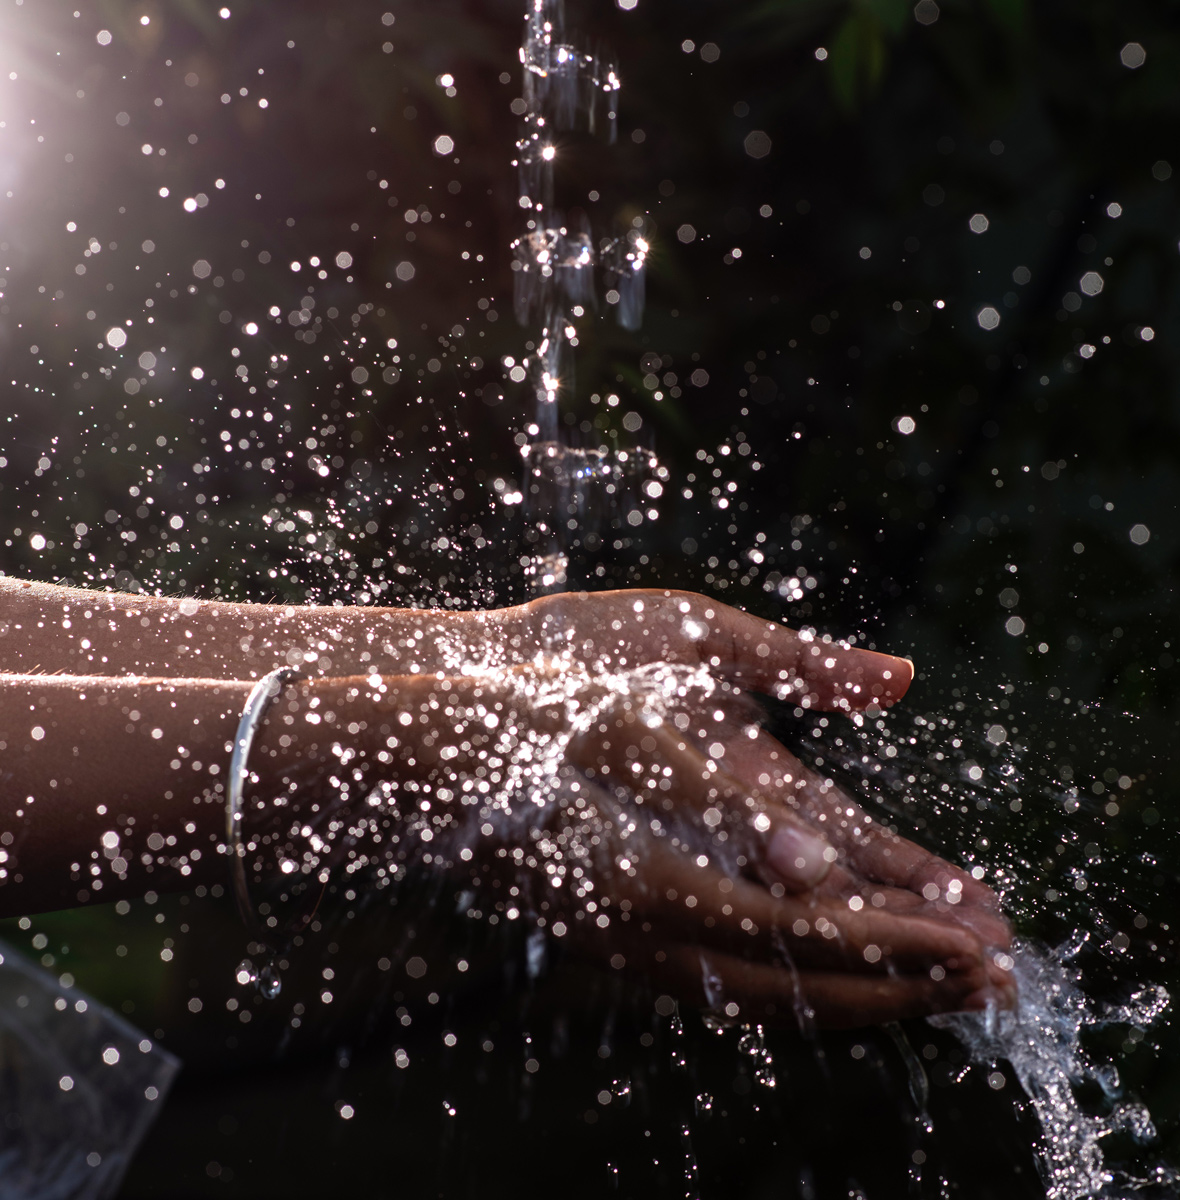 water falling on hands